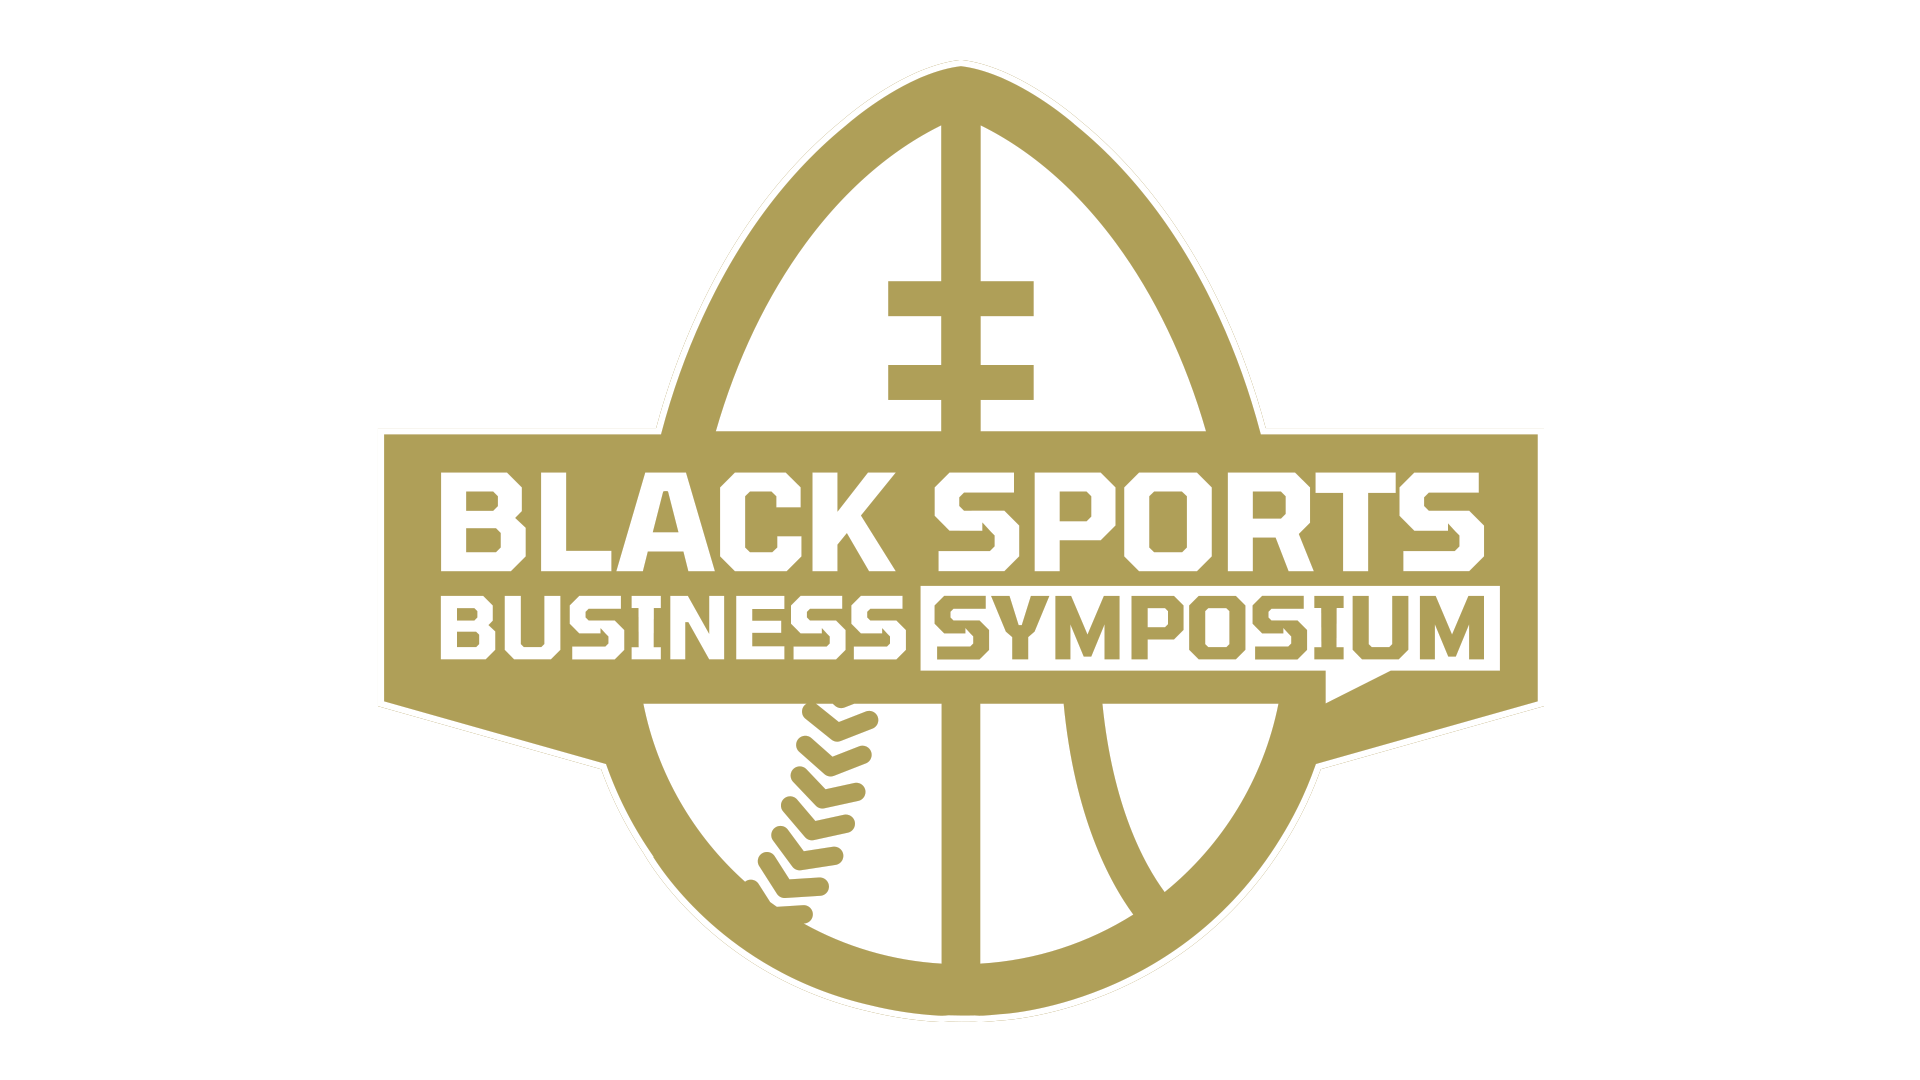 Black Sports Business Symposium – Past, Present, and Future